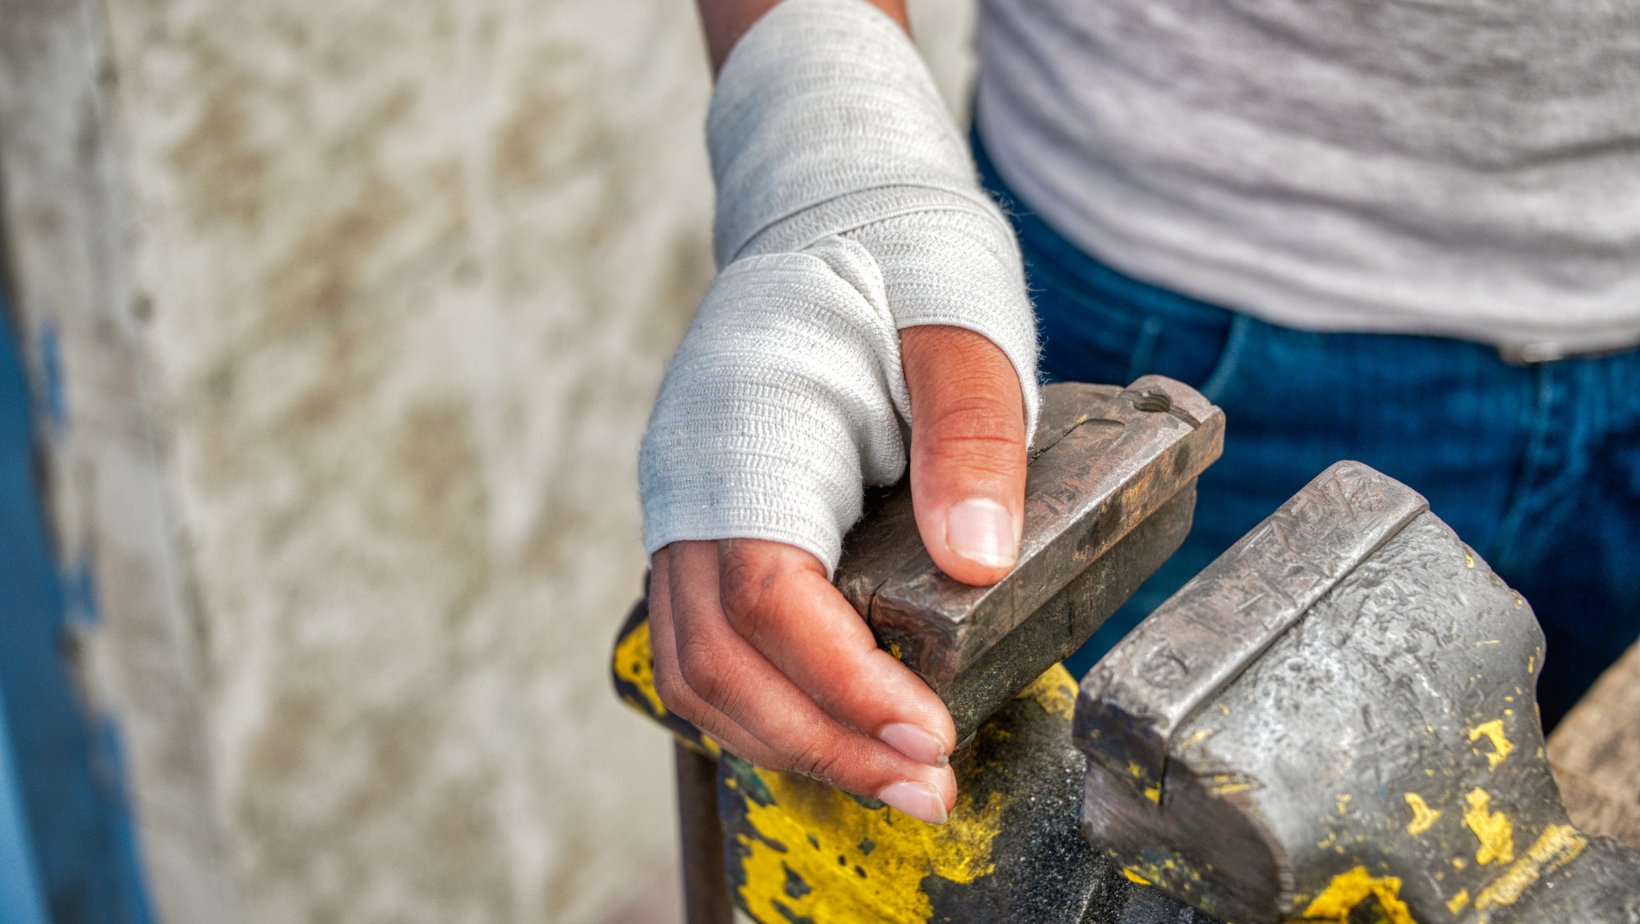 A bandaged hand resting on a vice grip